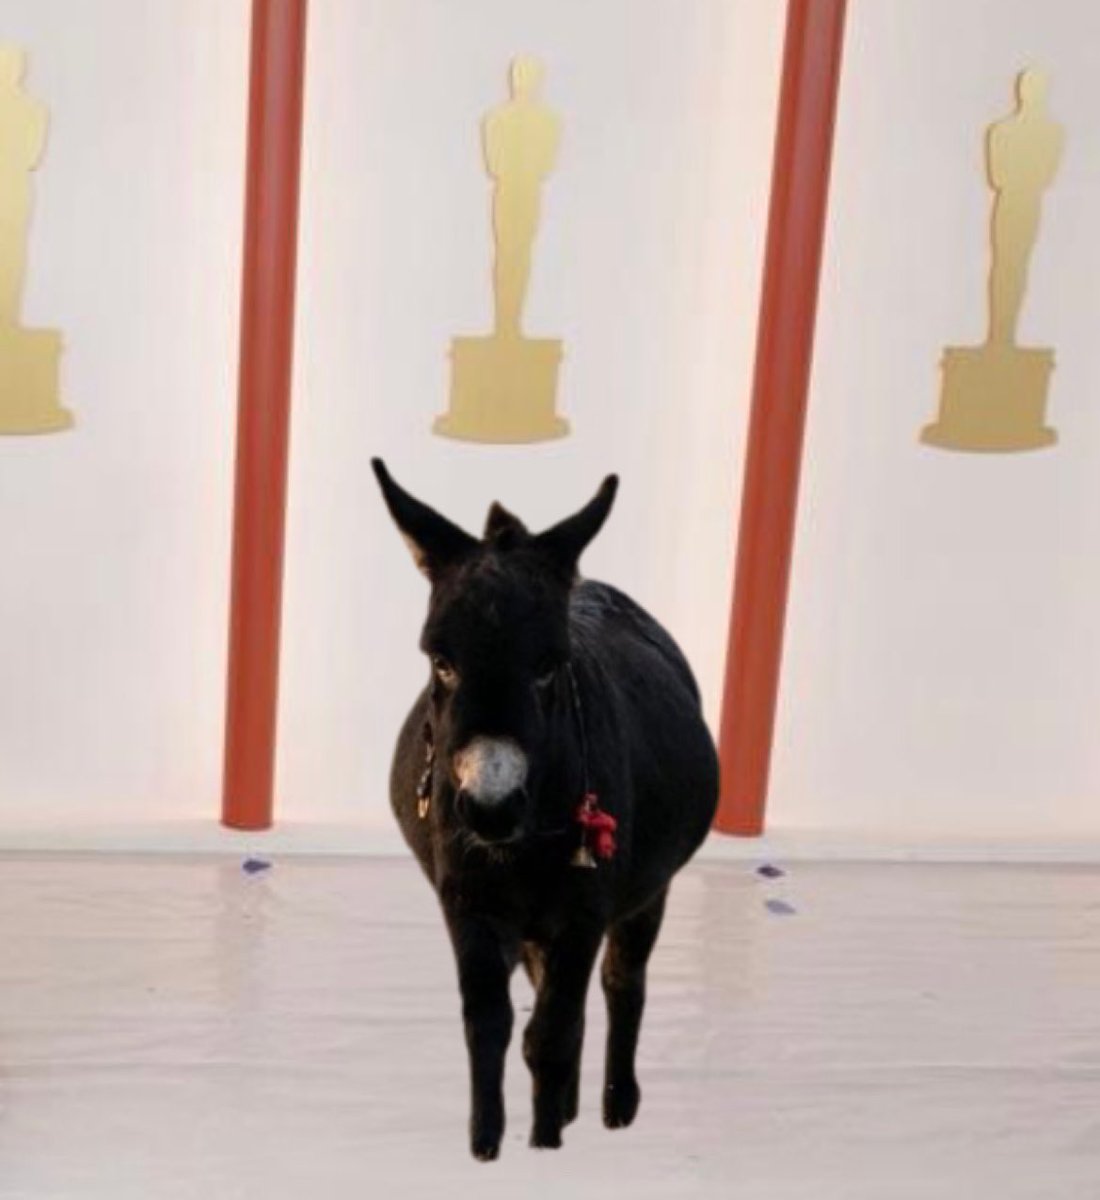 RT @rafiews: Jenny the Donkey has just arrived at the #Oscars champagne carpet https://t.co/7tOeTMO7FP